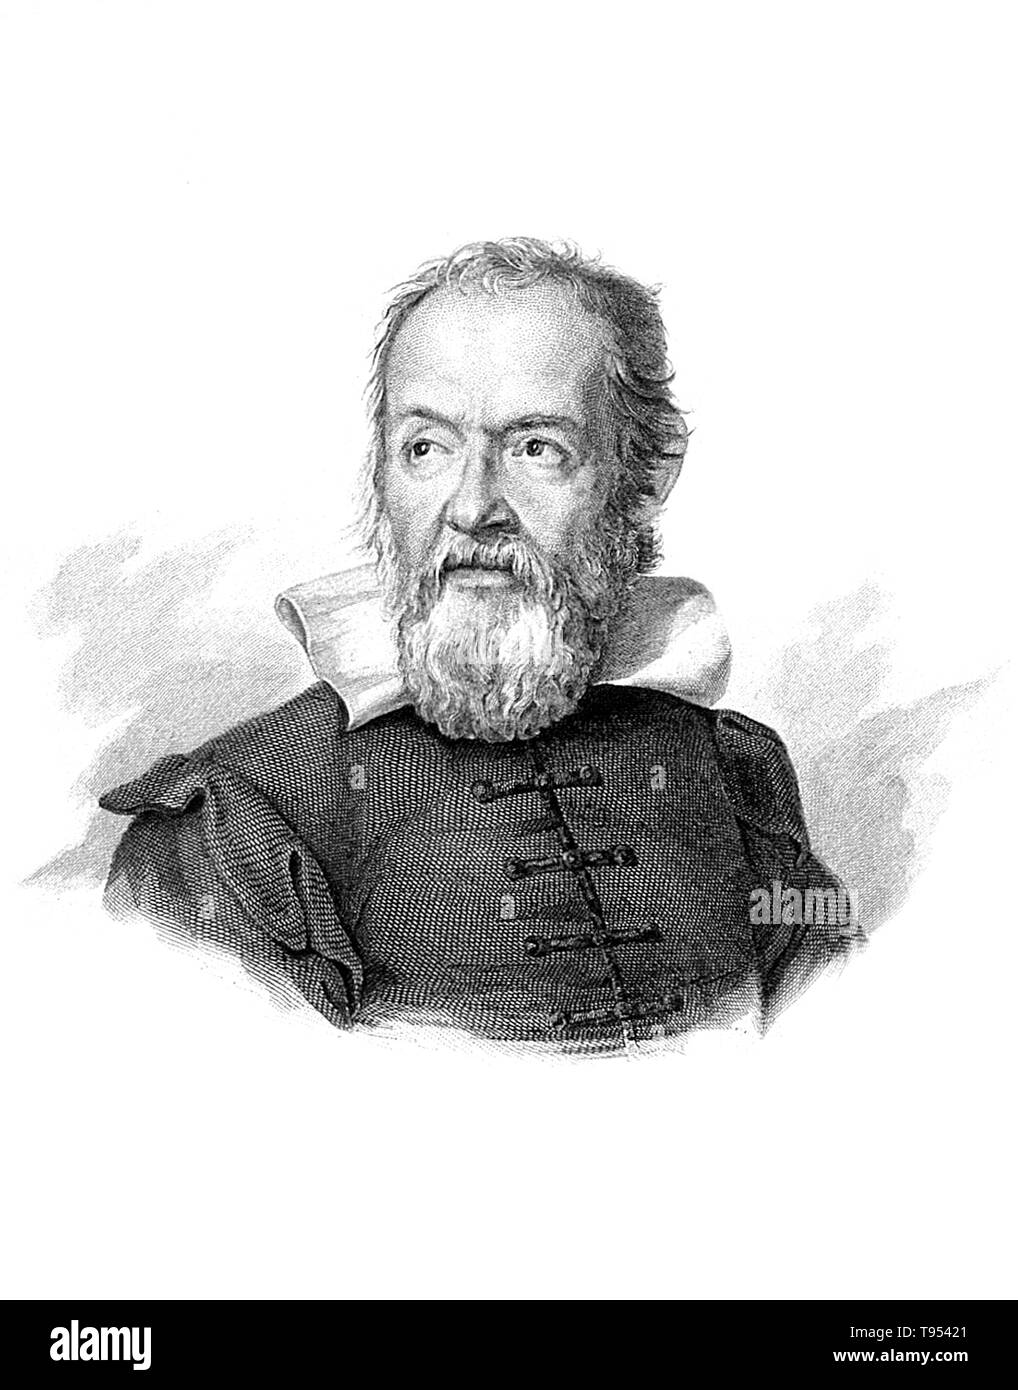 Galileo Galilei (February 15, 1564 - January 8, 1642) was an Italian physicist, mathematician, astronomer, and philosopher who played a major role in the Scientific Revolution. His achievements include improvements to the telescope, important astronomical observations and support for Copernicanism. He has been called the 'father of modern observational astronomy', the 'father of modern physics', the 'father of science', and 'the father of modern science'. Stock Photo